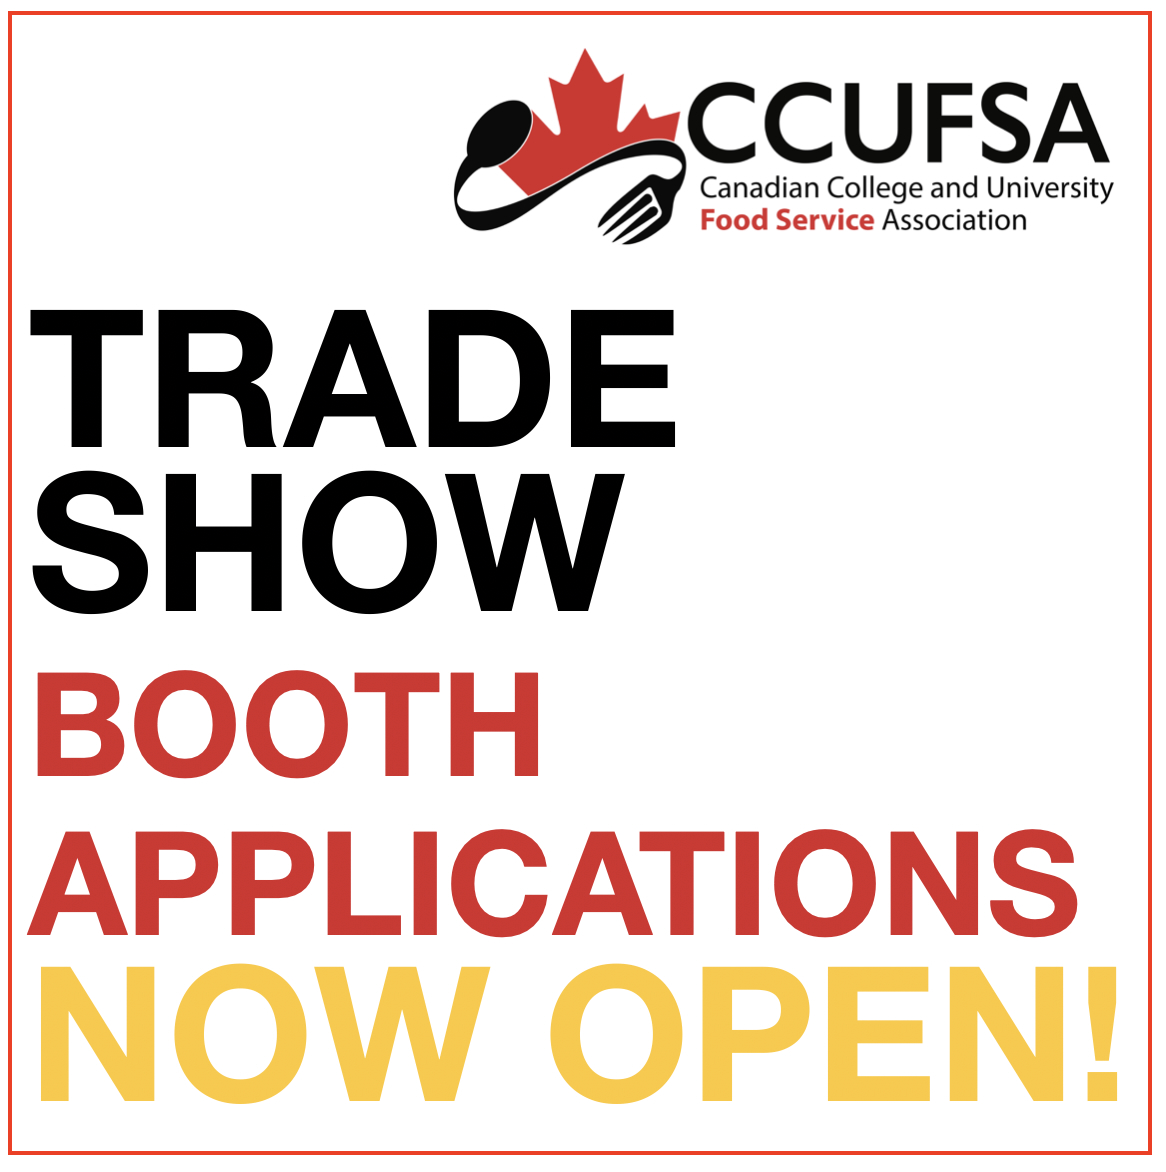 We are excited to let you know Booth Applications are NOW OPEN for the CCUFSA Trade Show on Thursday, June 27th in Charlottetown, PEI.

Visit the Conference website here to book your booth: site.pheedloop.com/event/EVEZMTQK…

#CCUFSA #CCUFSA2024